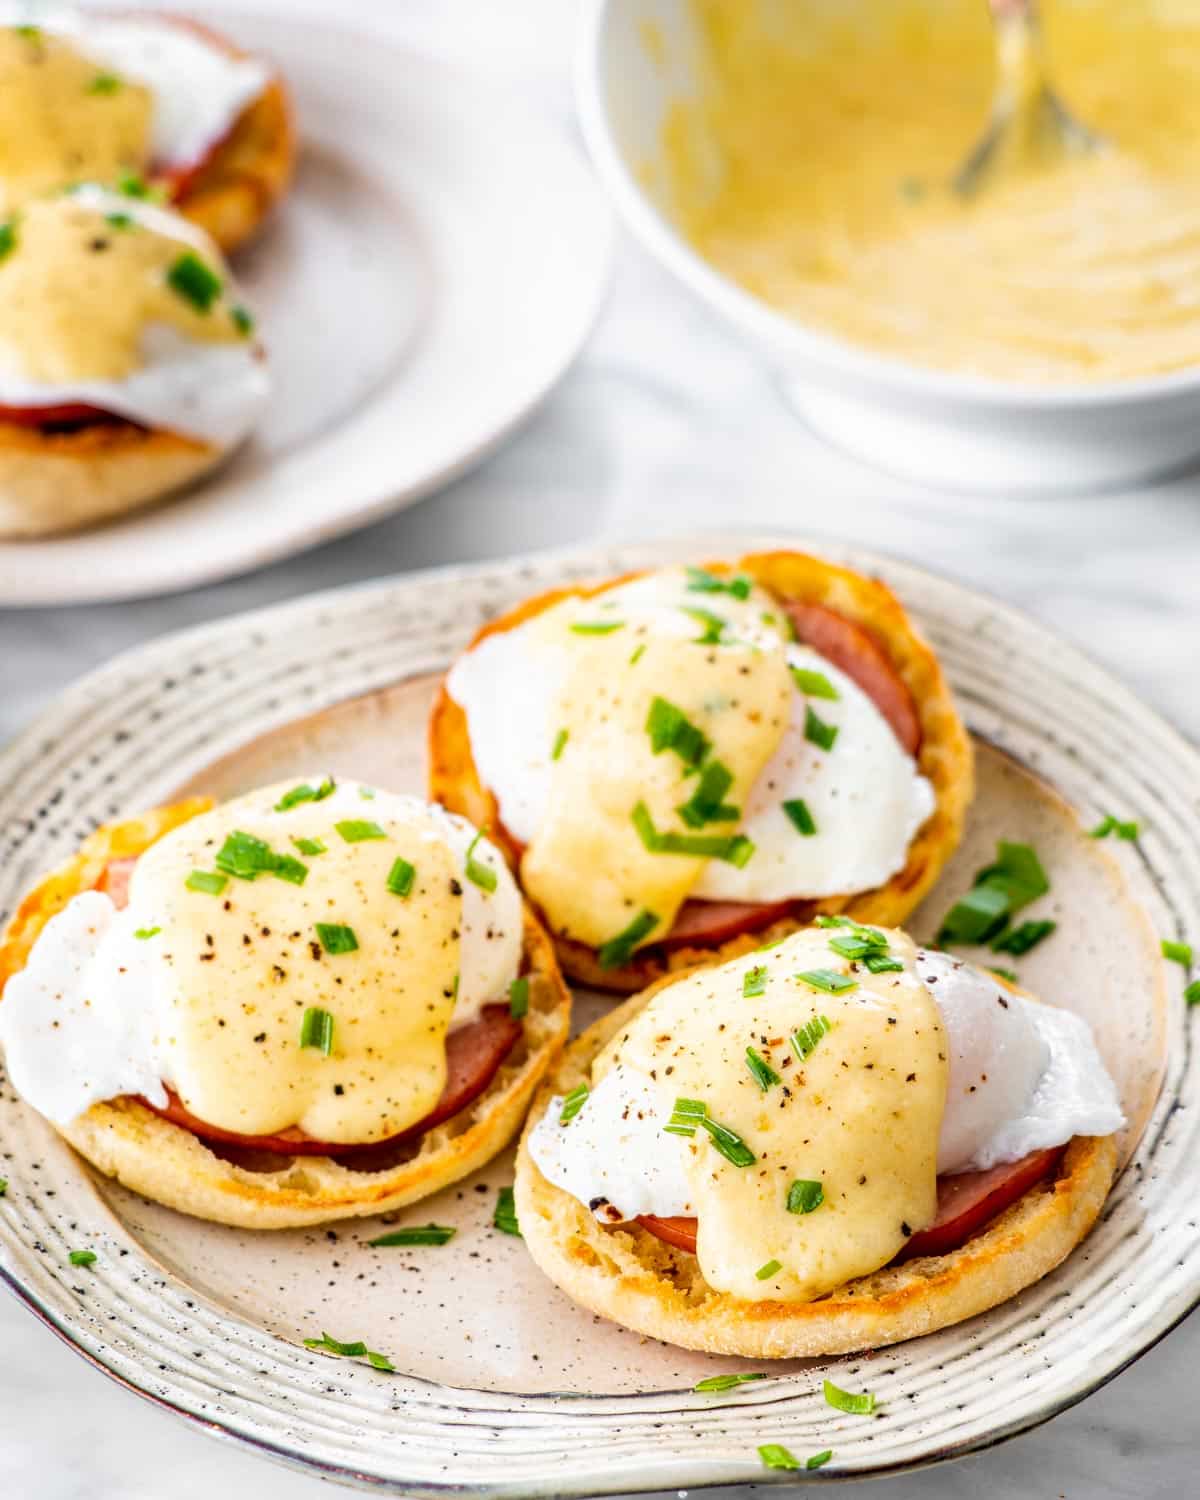 3 eggs benedict on a large plate garnished with chives